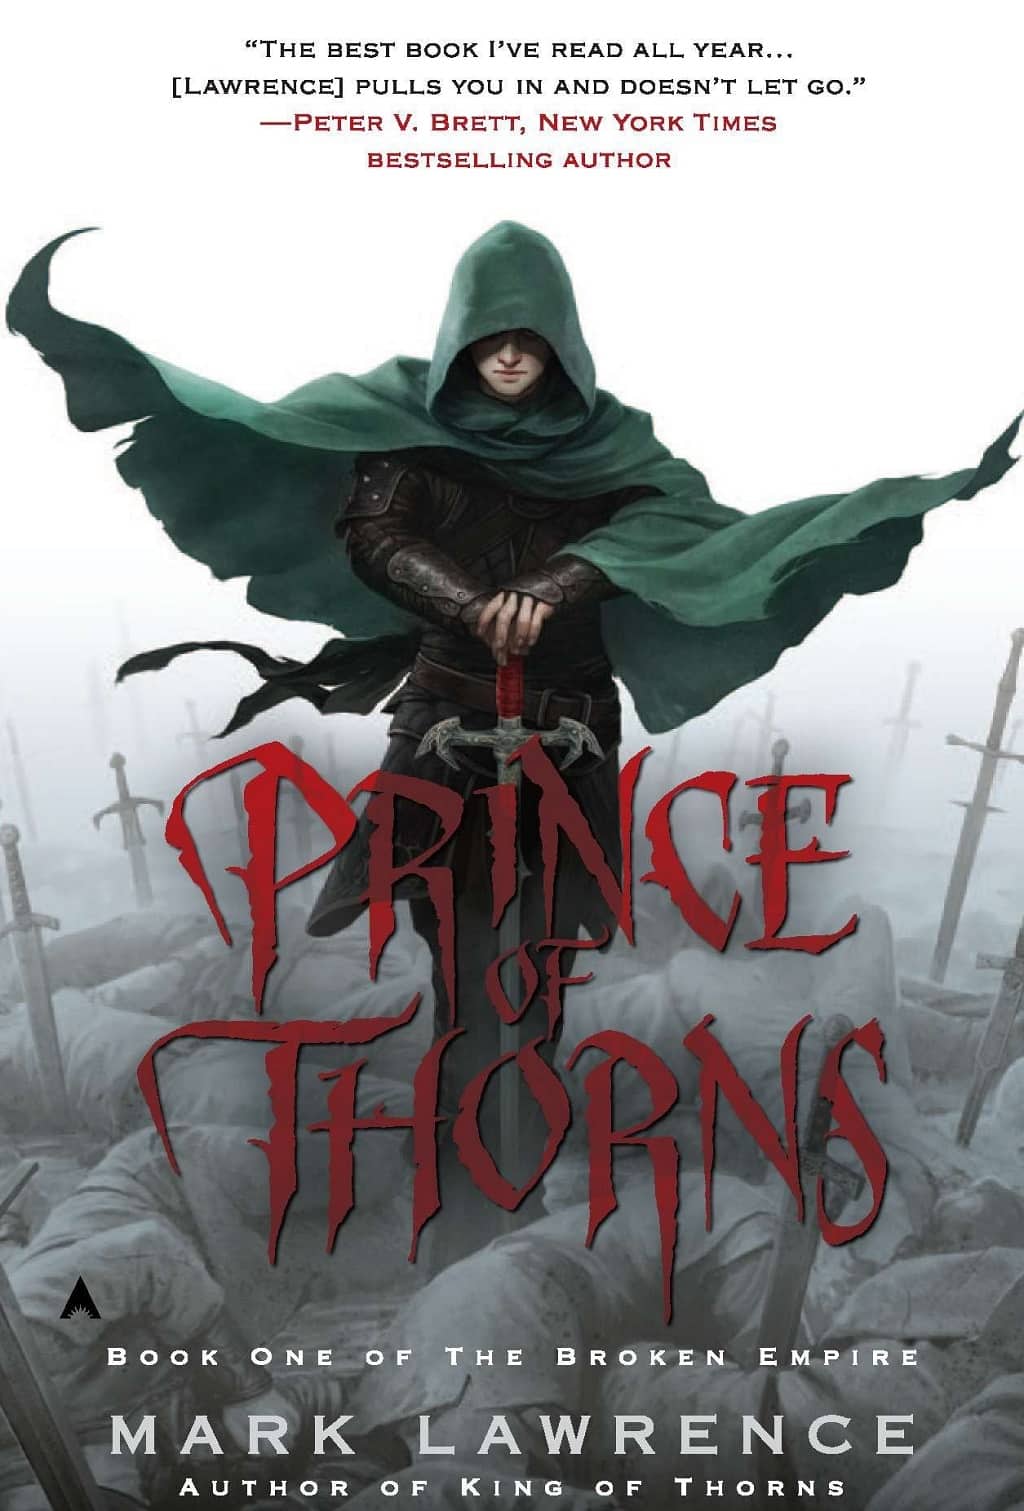 Prince of Thorns Audiobook Free Download and Listen